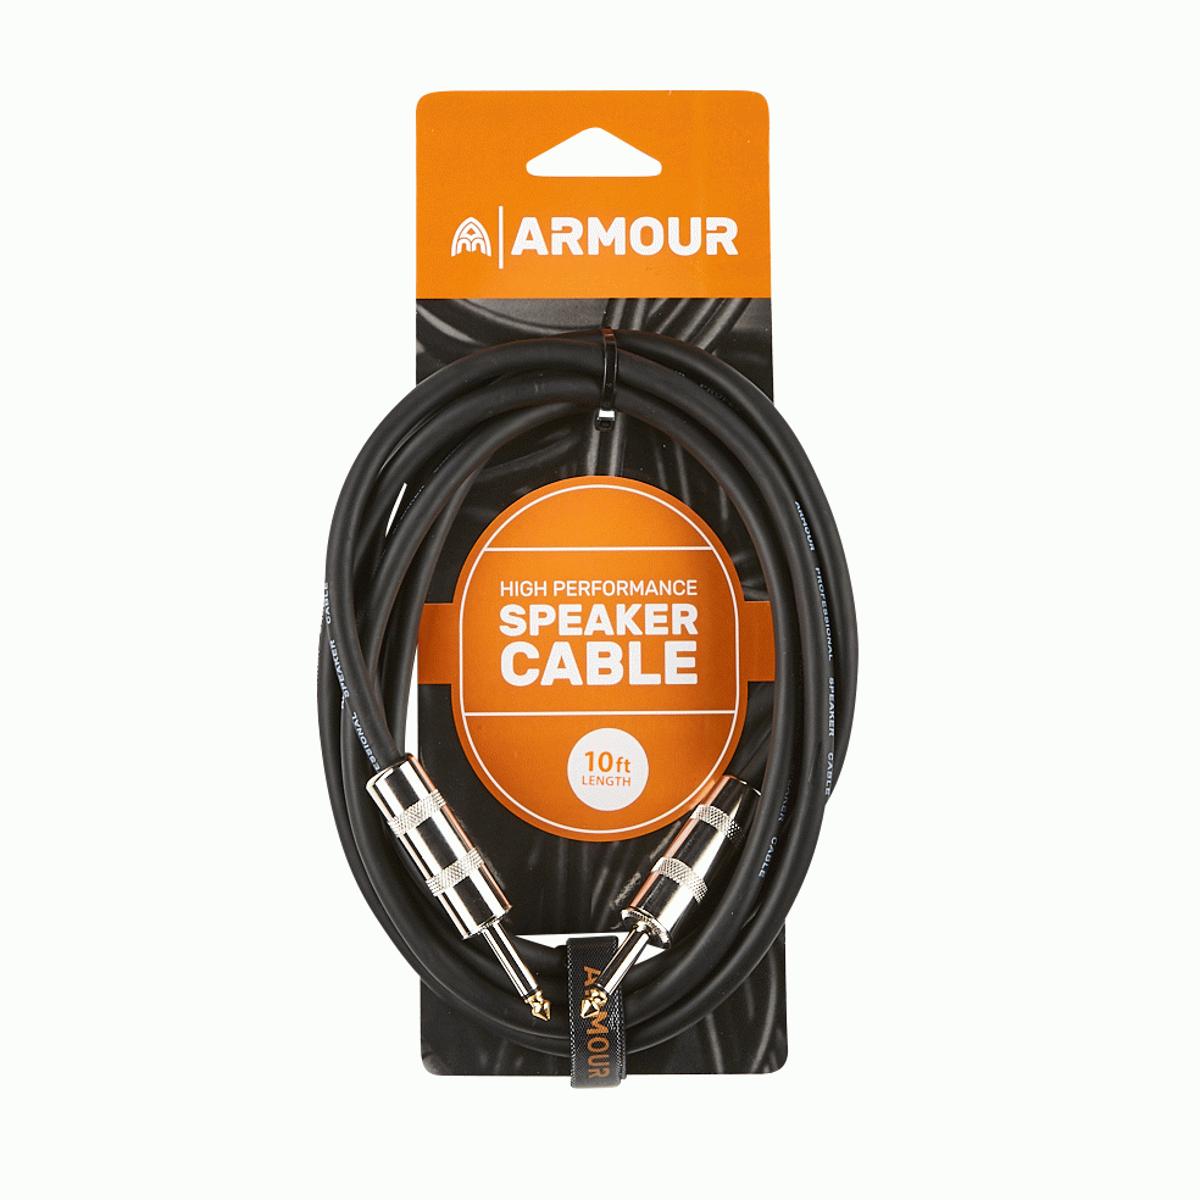 Armour SJP10 Speaker Cable 10ft Jack to Jack